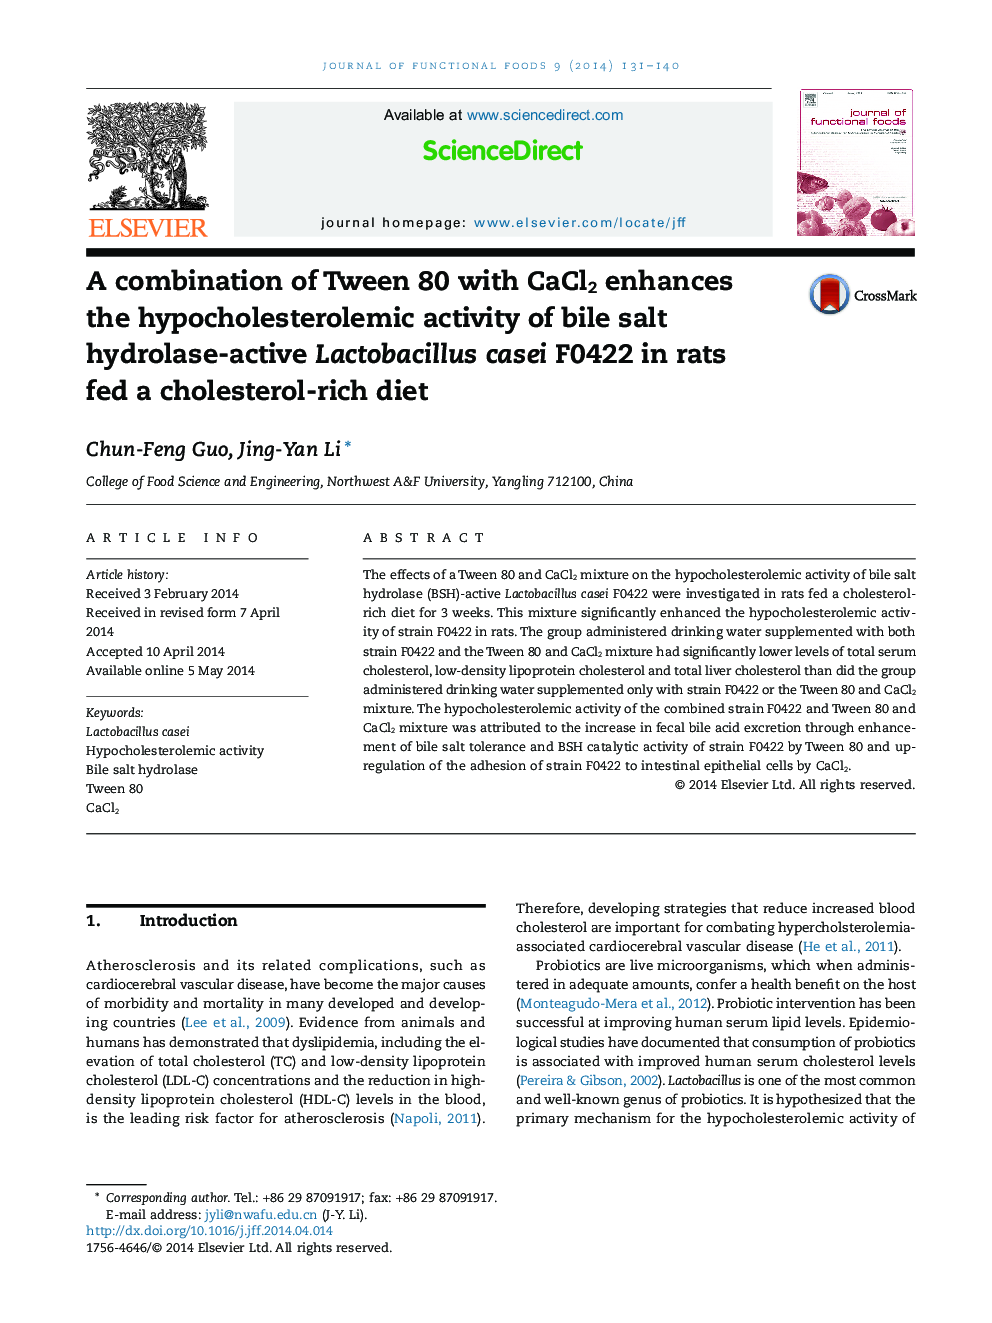 A combination of Tween 80 with CaCl2 enhances the hypocholesterolemic activity of bile salt hydrolase-active Lactobacillus casei F0422 in rats fed a cholesterol-rich diet